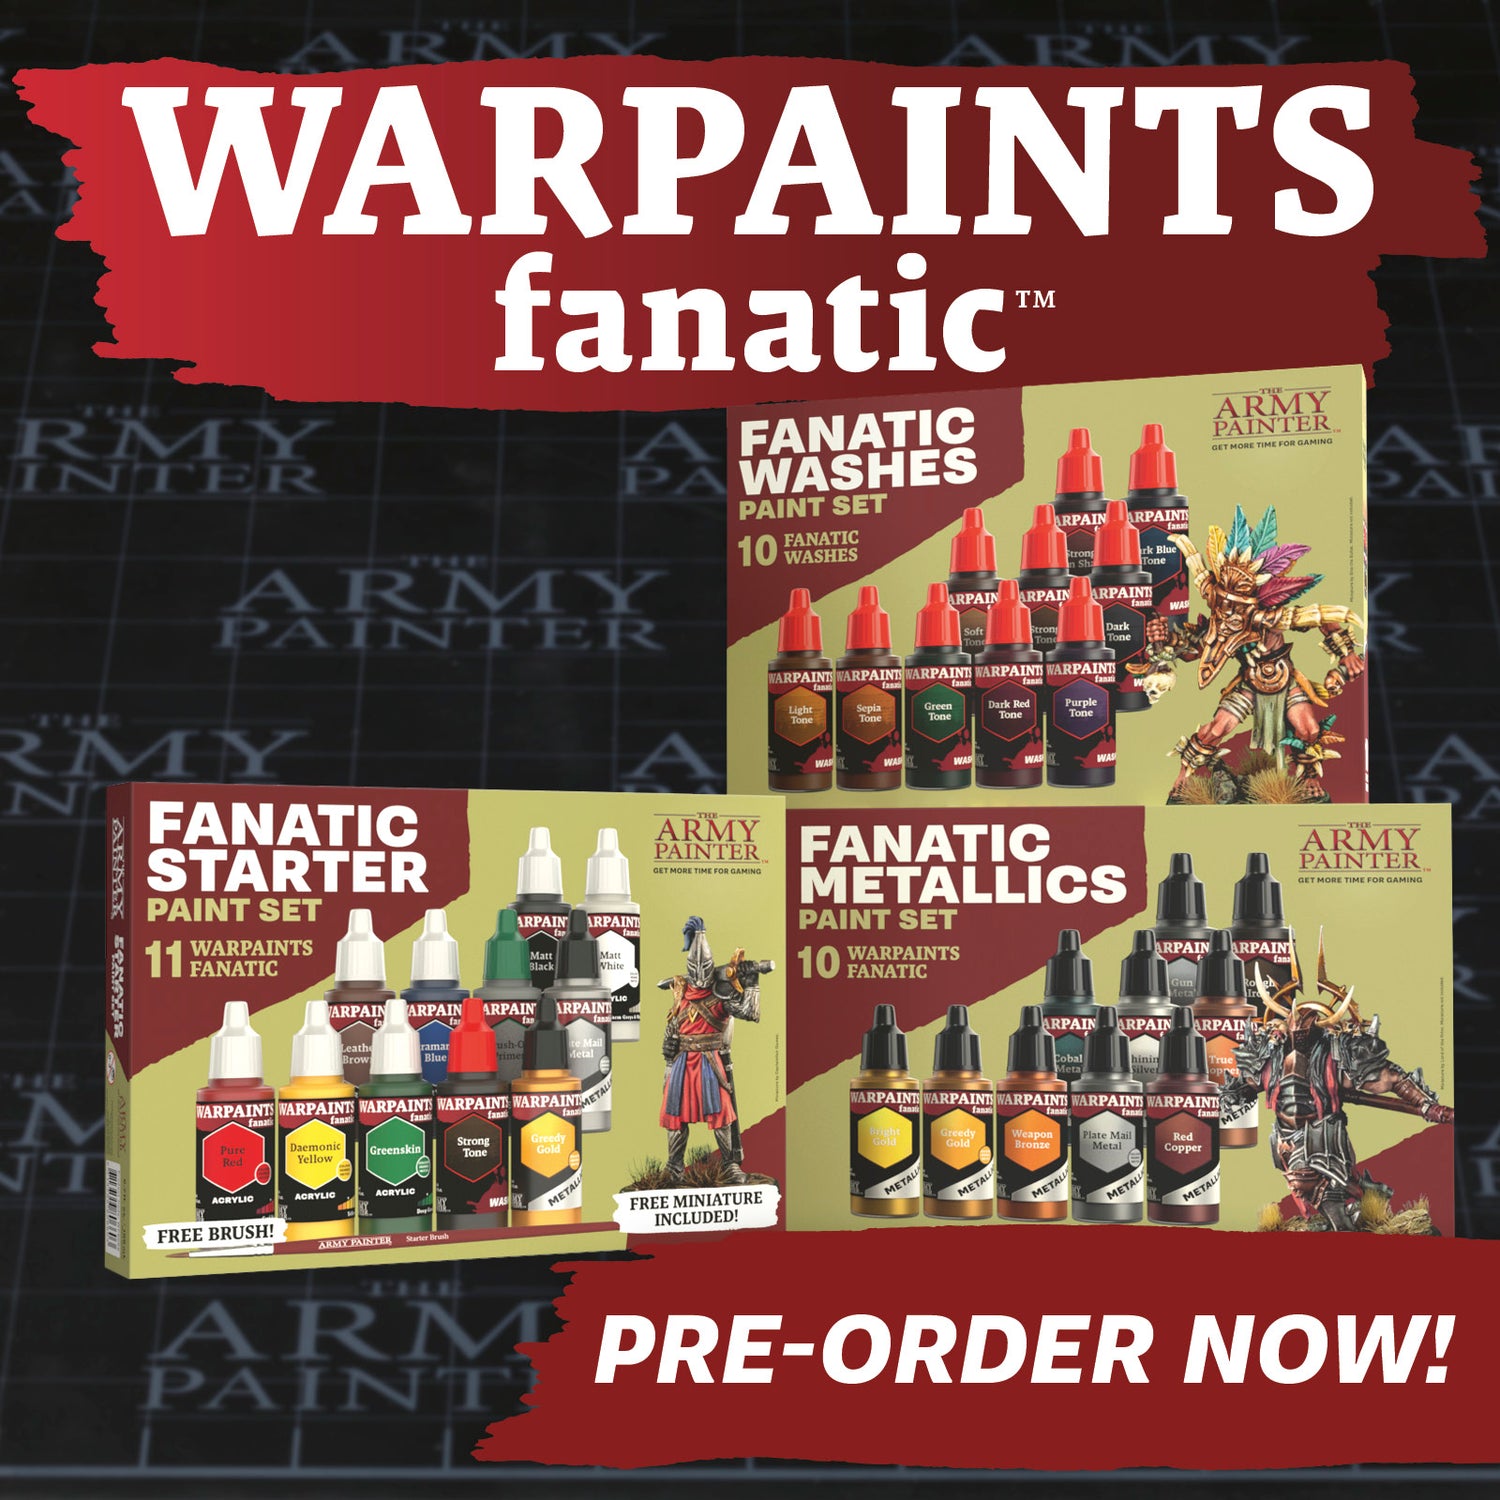 Pre-order the Warpaints Fanatic Starter, Washes, and Metallics set today!